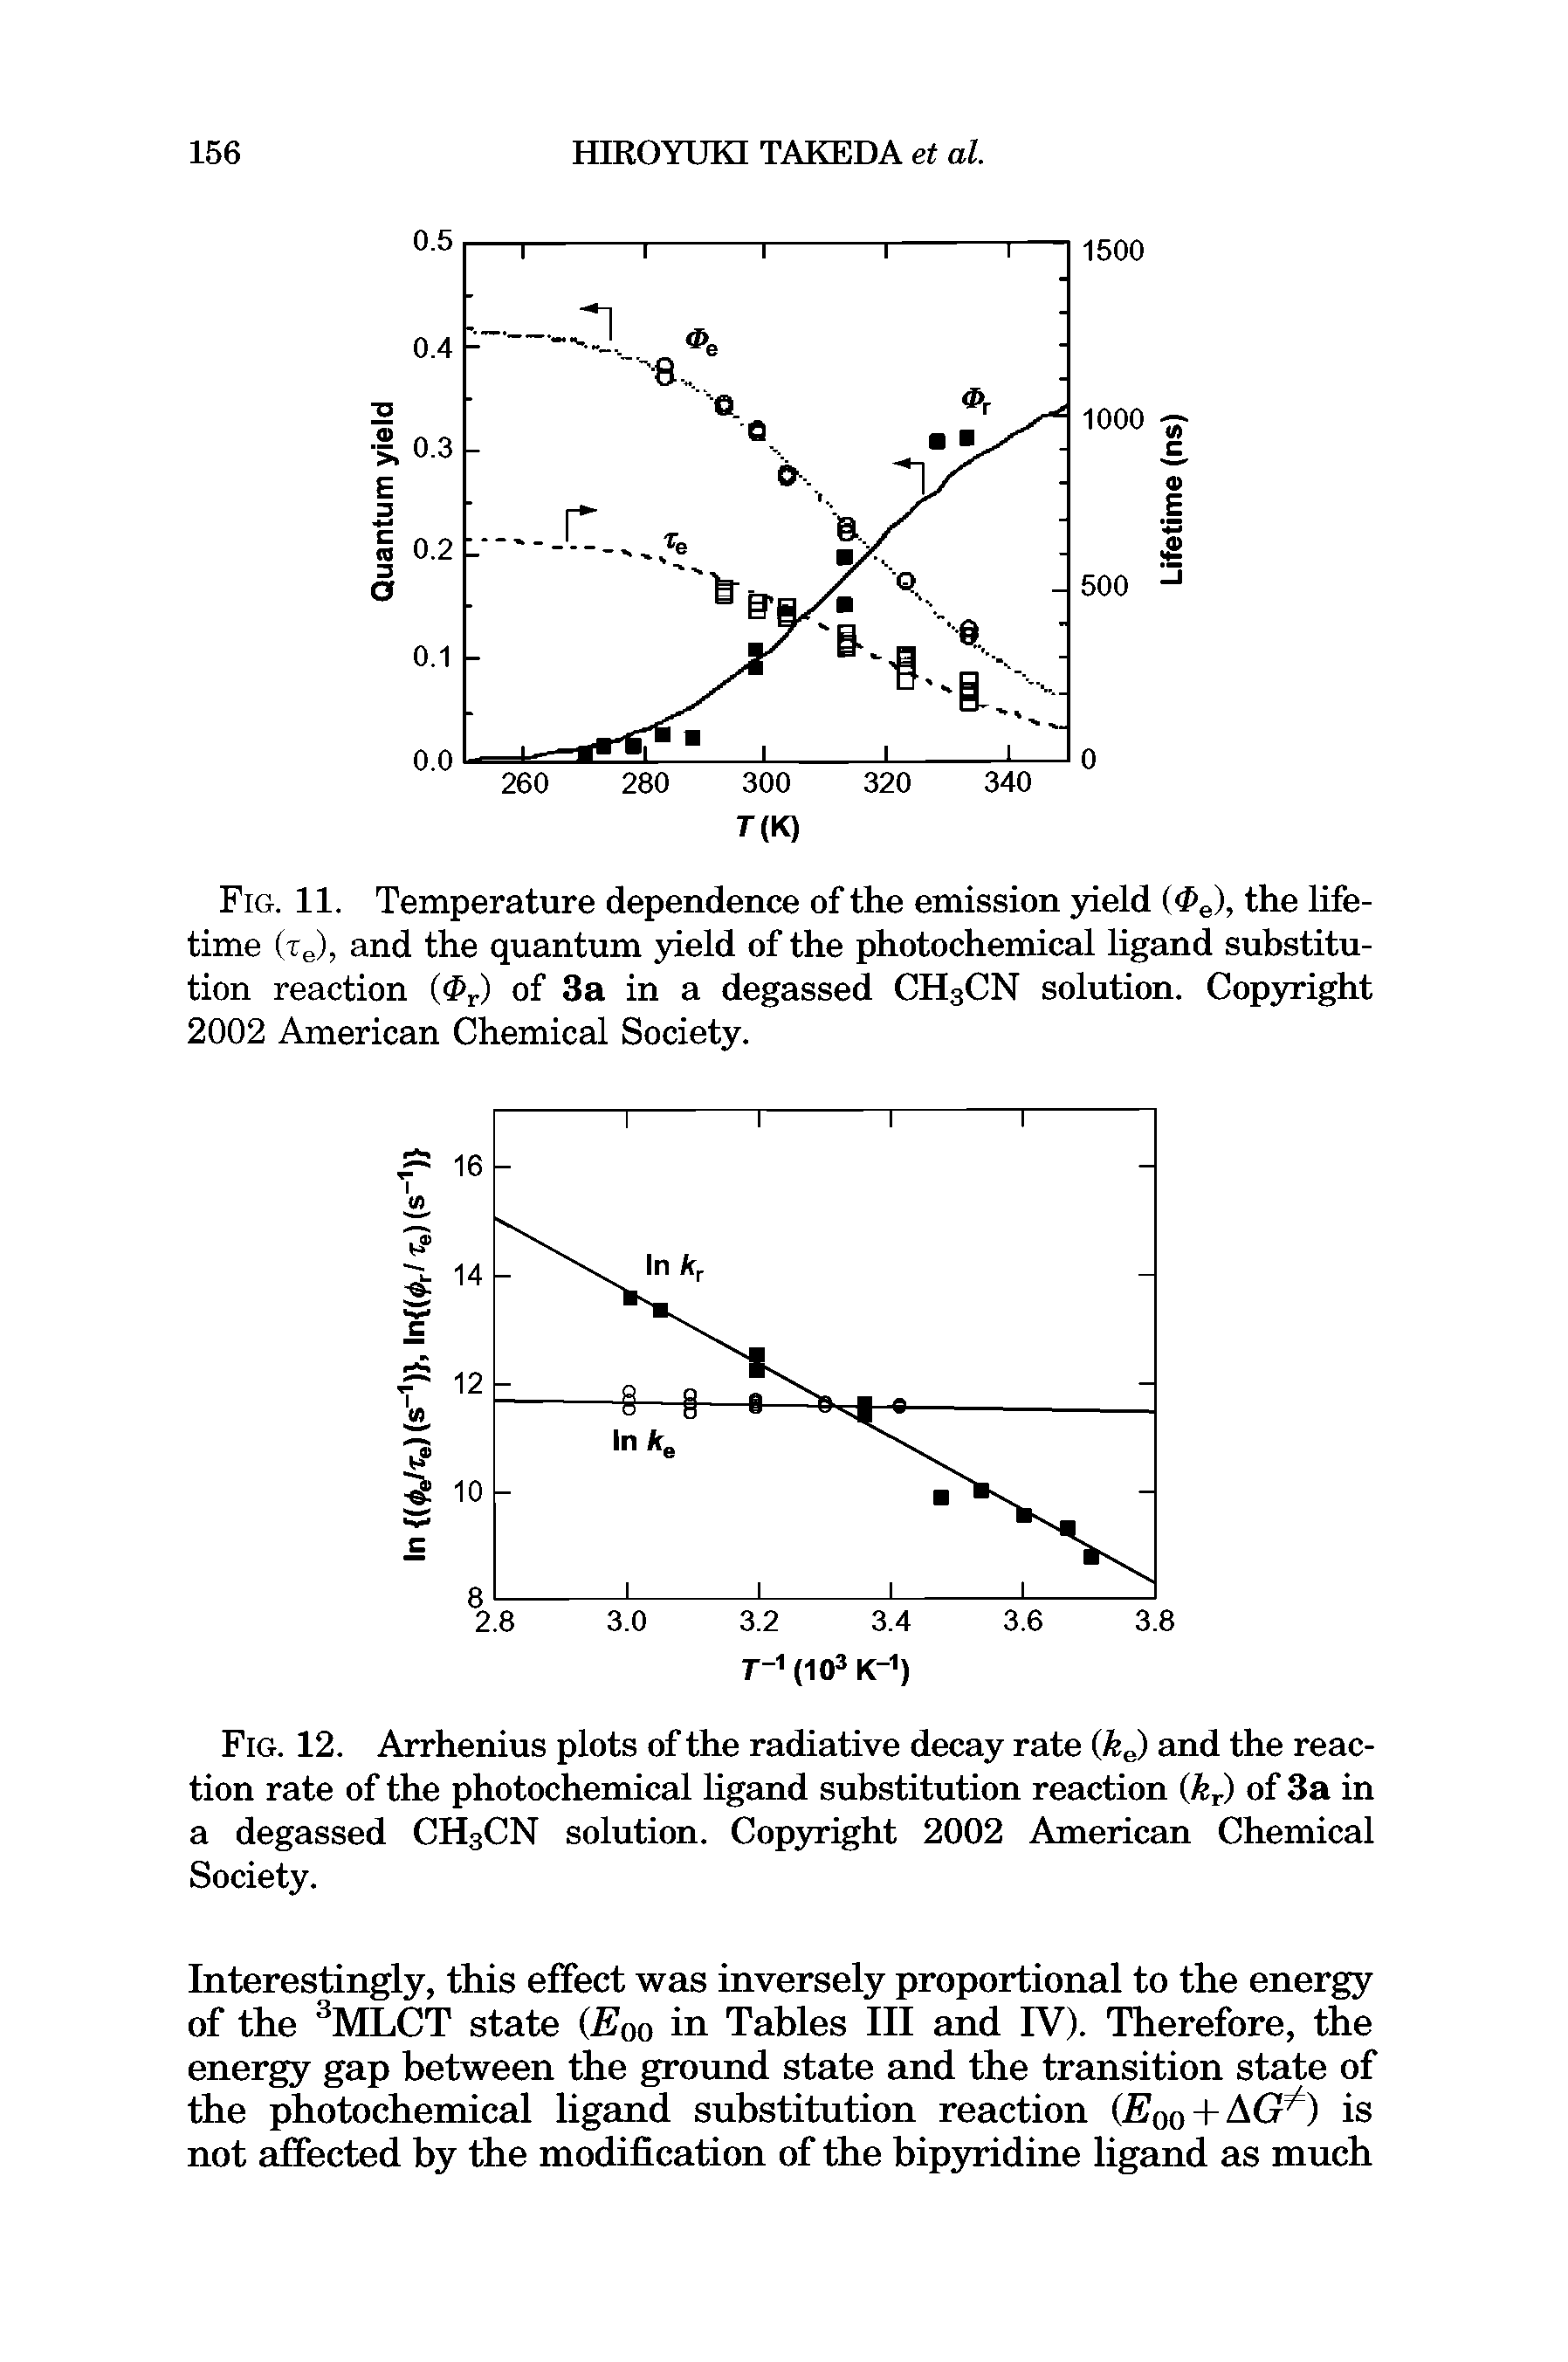 Fig. 11. Temperature dependence of the emission yield the lifetime (te), and the quantum yield of the photochemical ligand substitution reaction (cPr) of 3a in a degassed CH3CN solution. Copyright 2002 American Chemical Society.